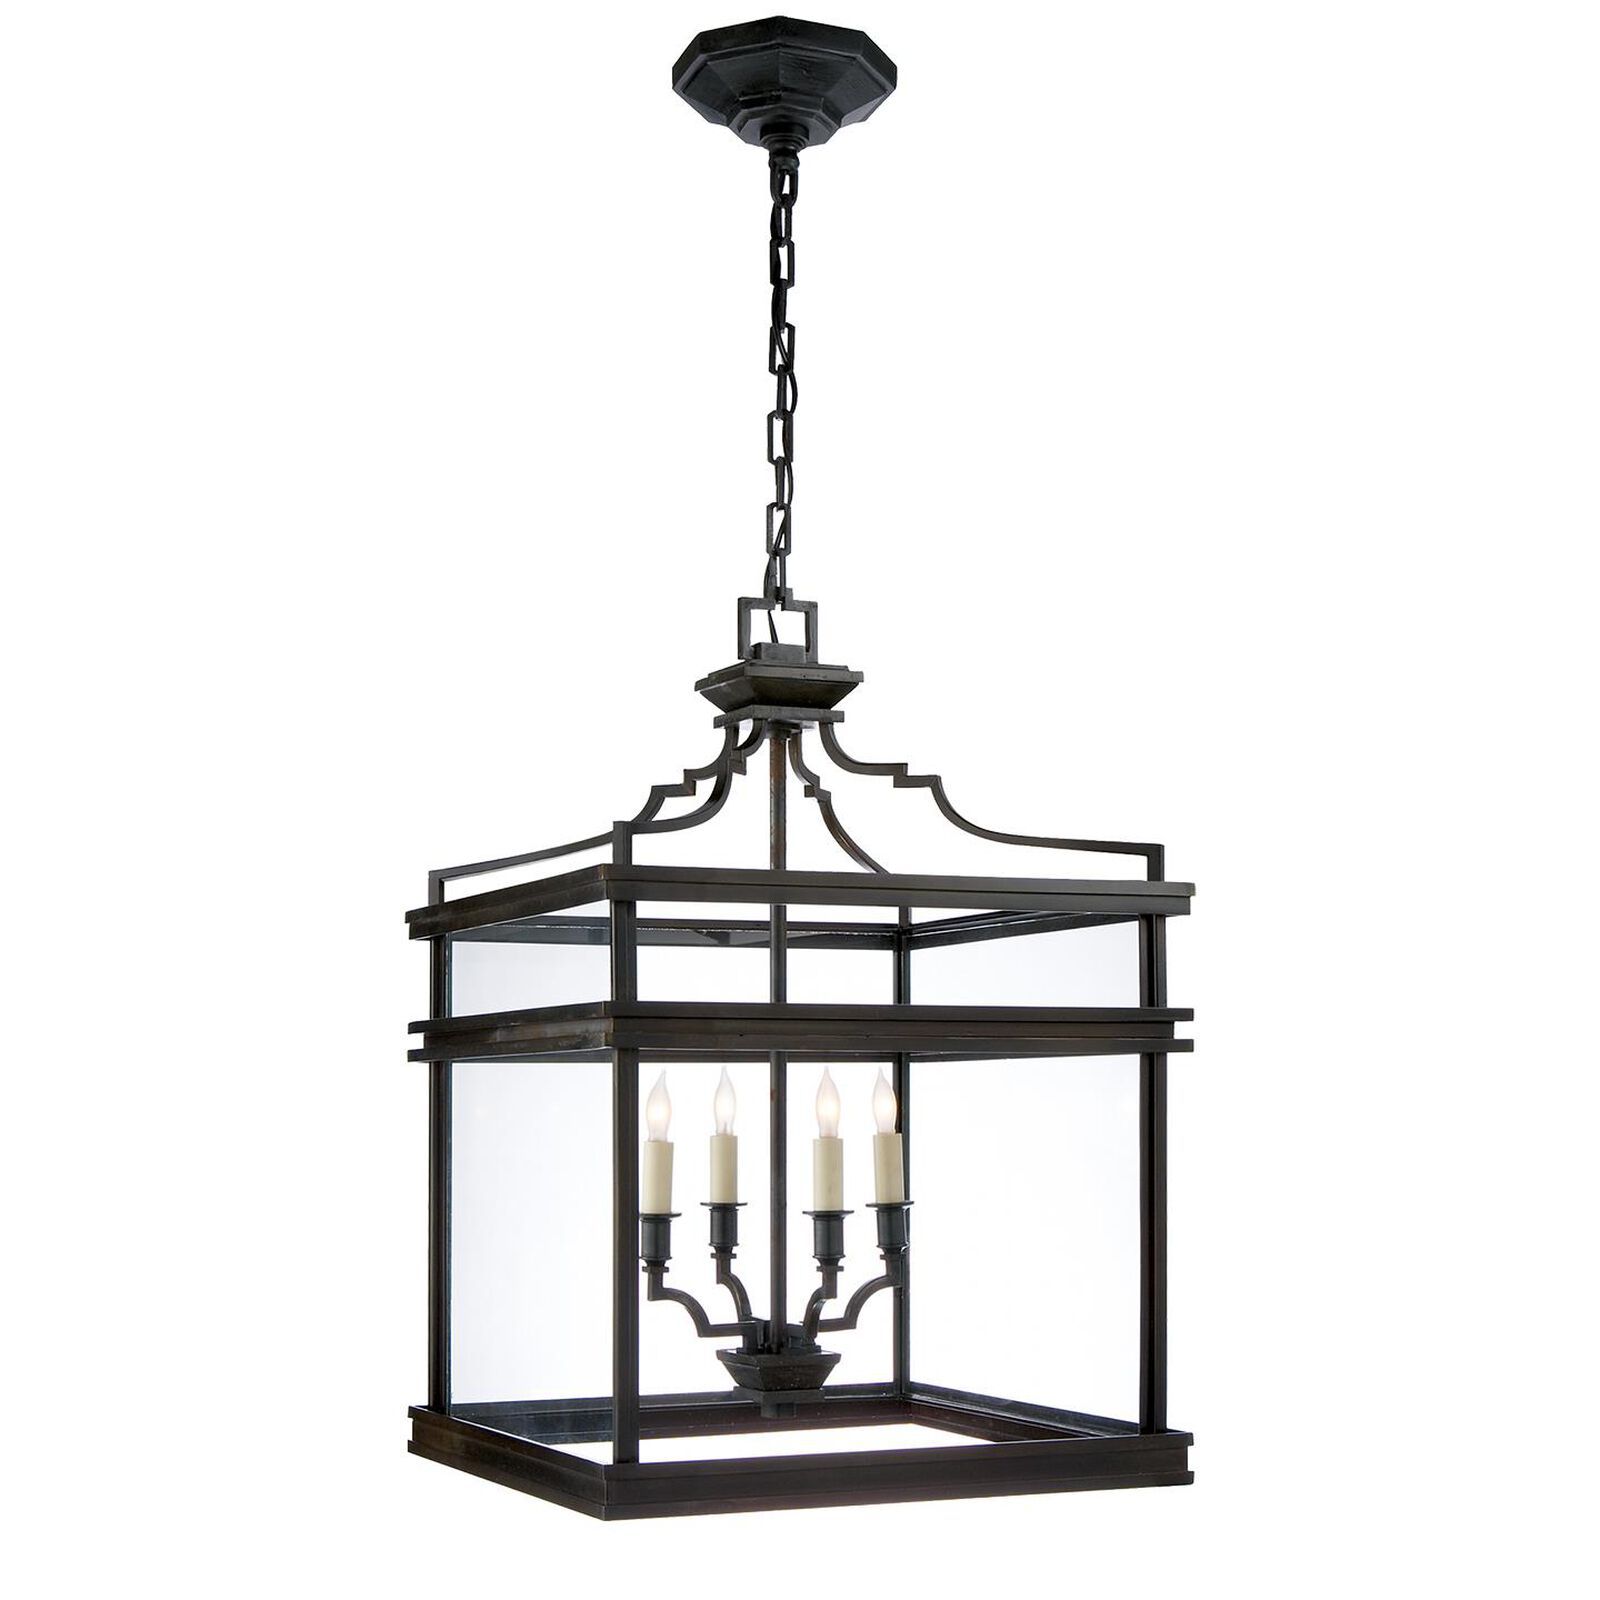 E. F. Chapman Mykonos 17 Inch Cage Pendant by Visual Comfort and Co. | Capitol Lighting 1800lighting.com